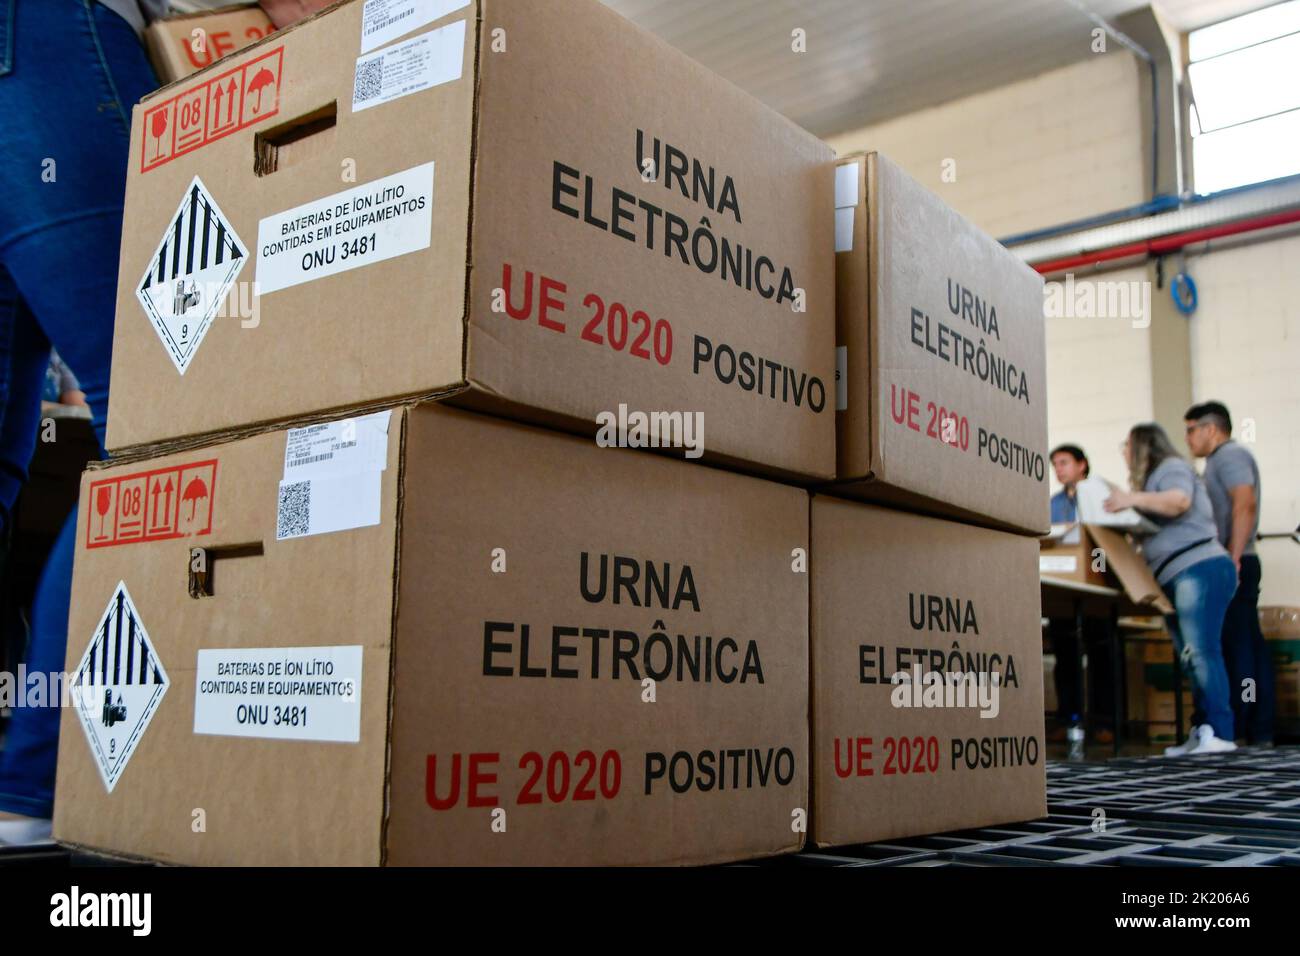 BRASÍLIA, DF - 21.09.2022: TRE REALIZA LACRAÇÃO DAS URNAS ELETRÔNICAS - Photo of the box containing the electronic voting machine to be distributed. This Wednesday (21) the TRE of the Federal District began the process of sealing and putting in boxes the electronic ballot boxes to distribute in the region's elections. (Photo: Ton Molina/Fotoarena) Stock Photo